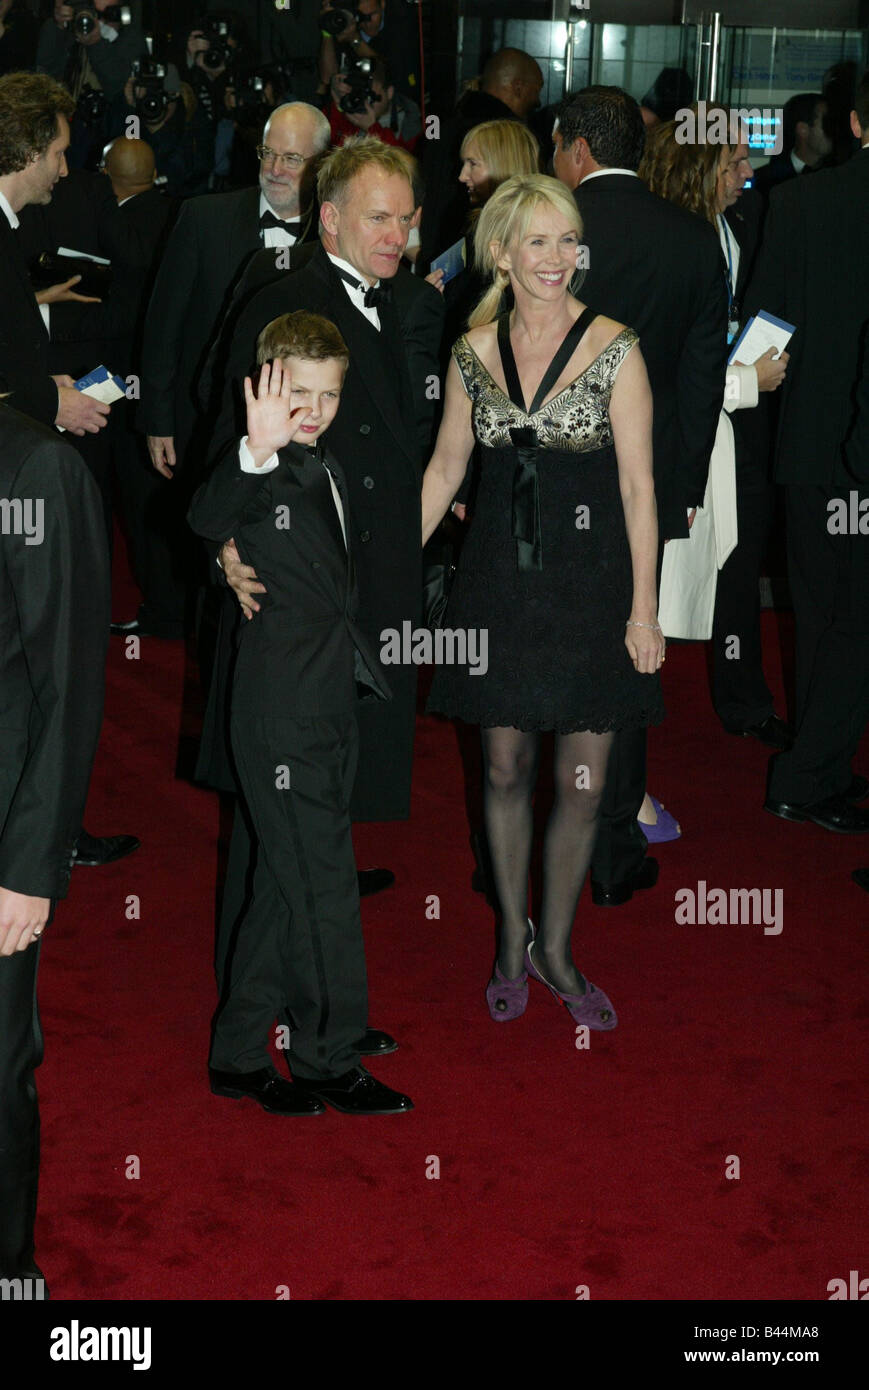 Trudie Styler and Sting with their son arrive for the world premiere of the new James Bond film Casino Royale at the Odeon Stock Photo